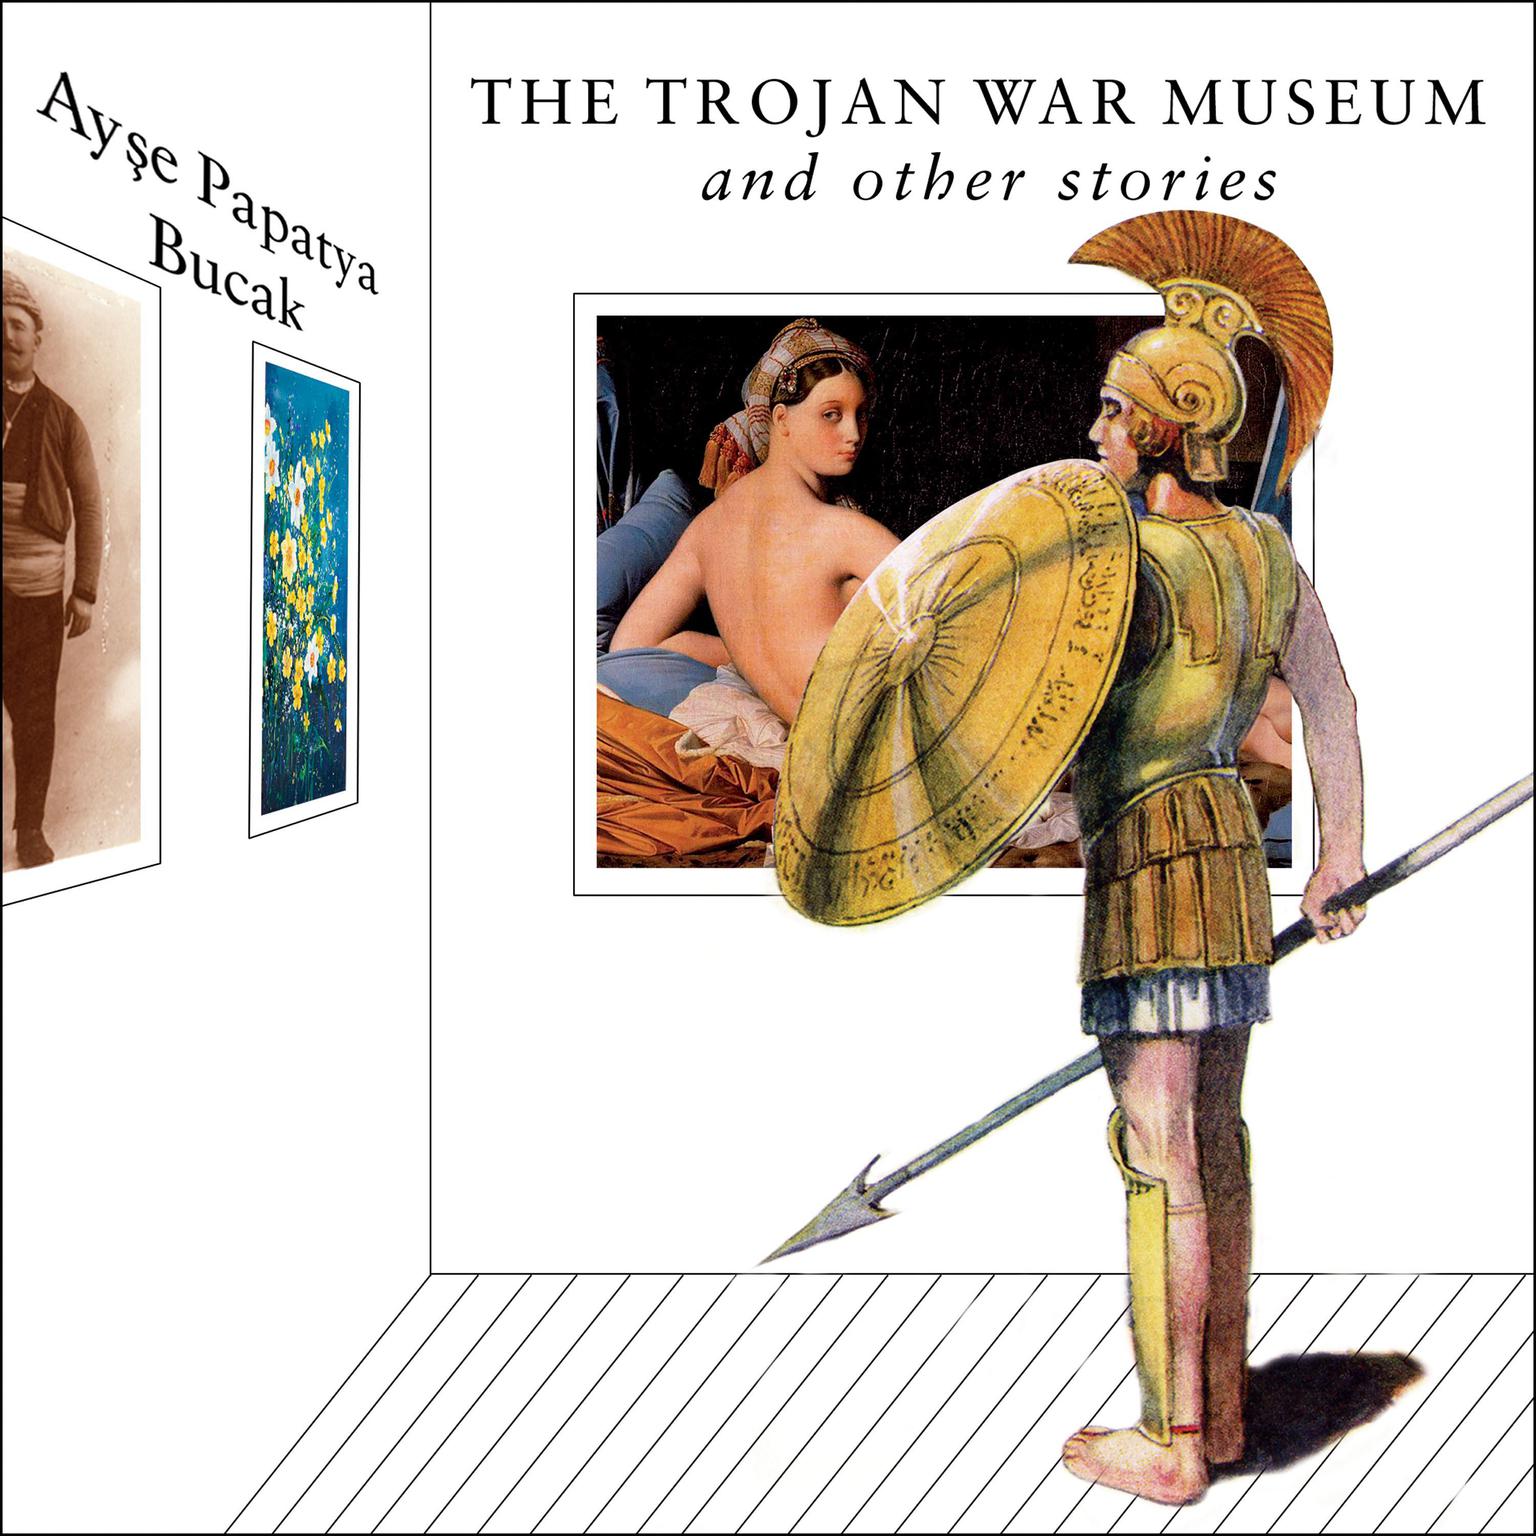 The Trojan War Museum: and Other Stories Audiobook, by Ayse Papatya Bucak